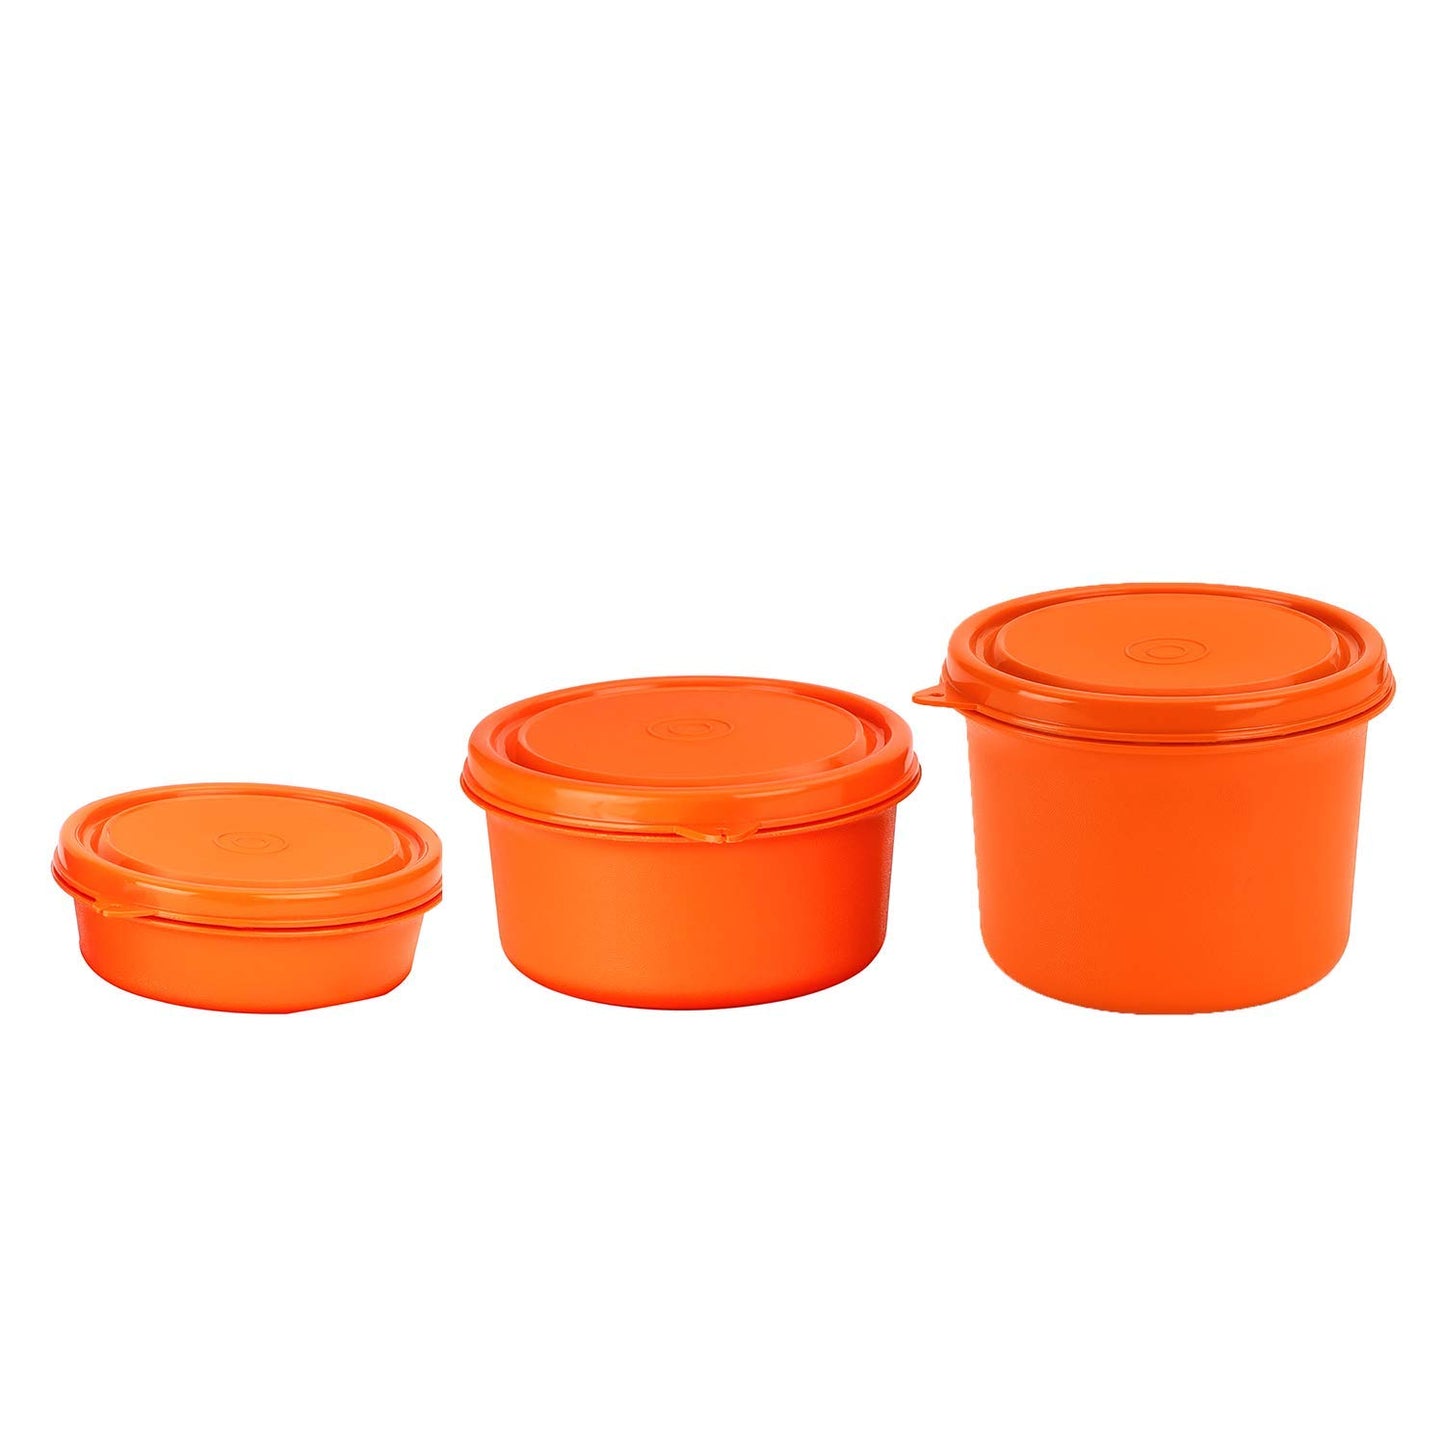 Benny Containers - Set of 3 (290, 450 & 600 ML)